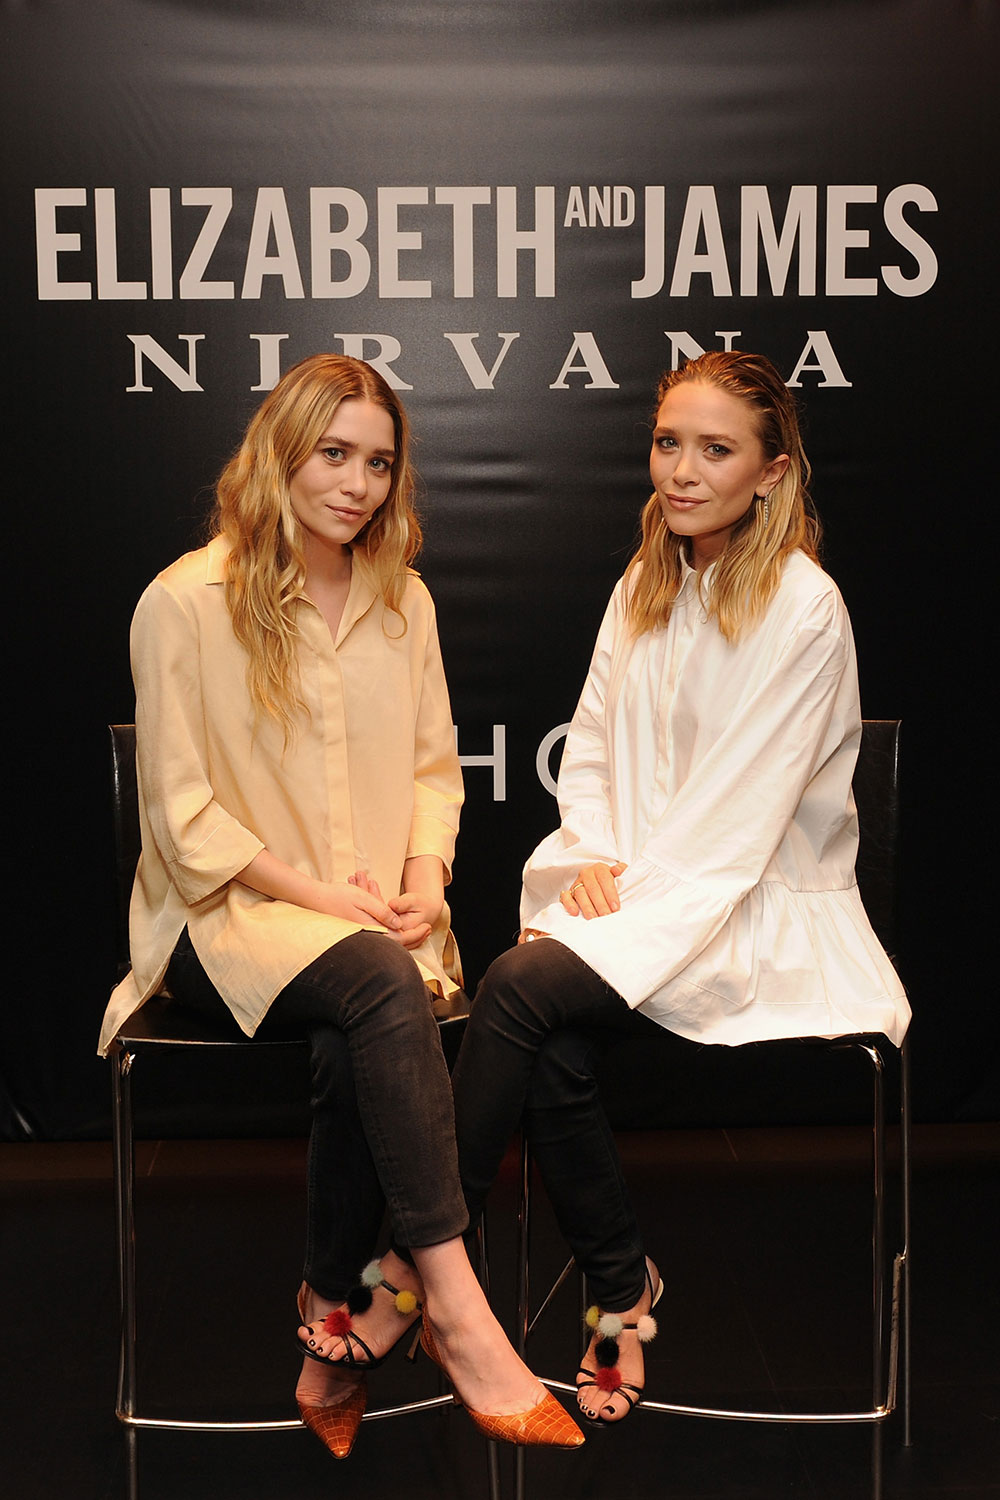 Mary-Kate and Ashley Olsen at the Elizabeth and James Sephora VIB Rouge event in 2014